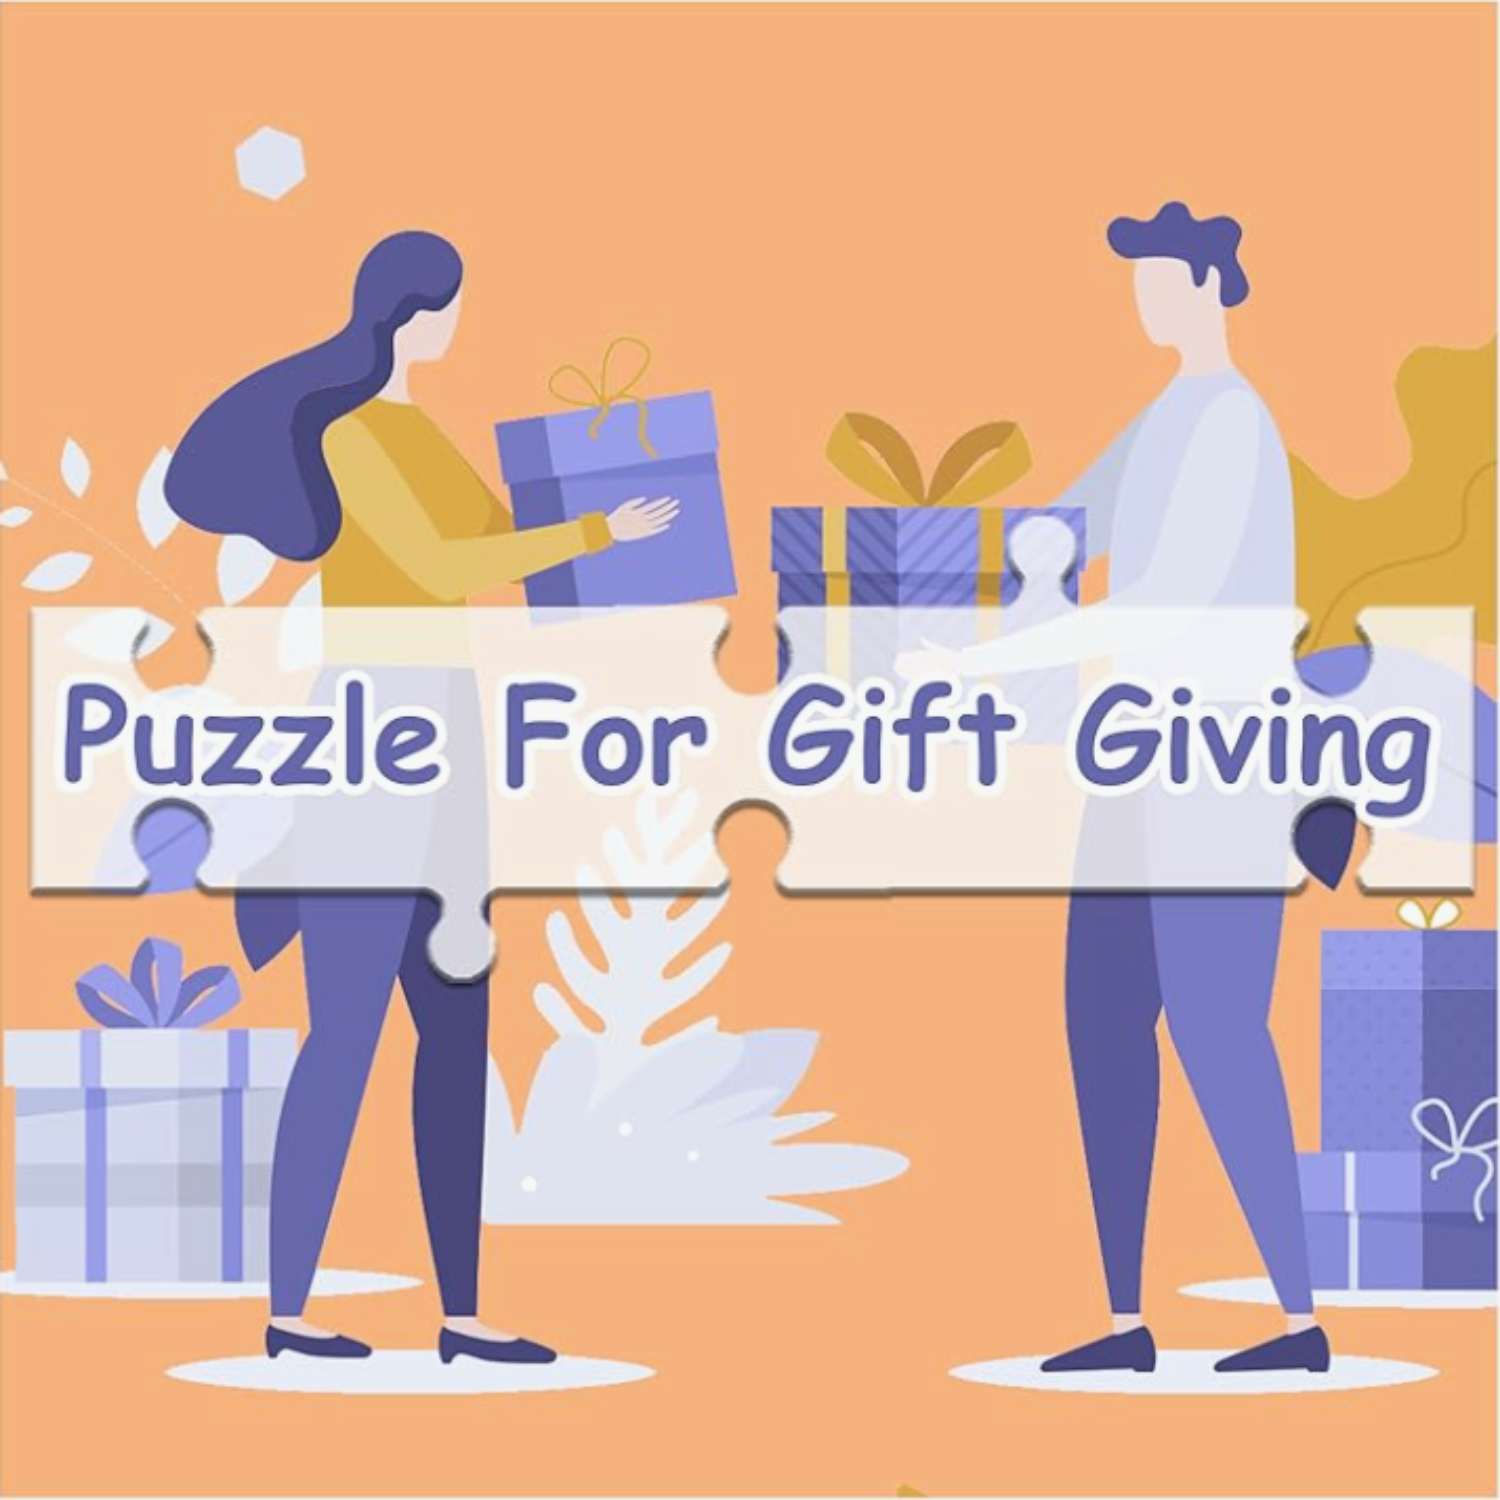 Puzzle For Gift Giving